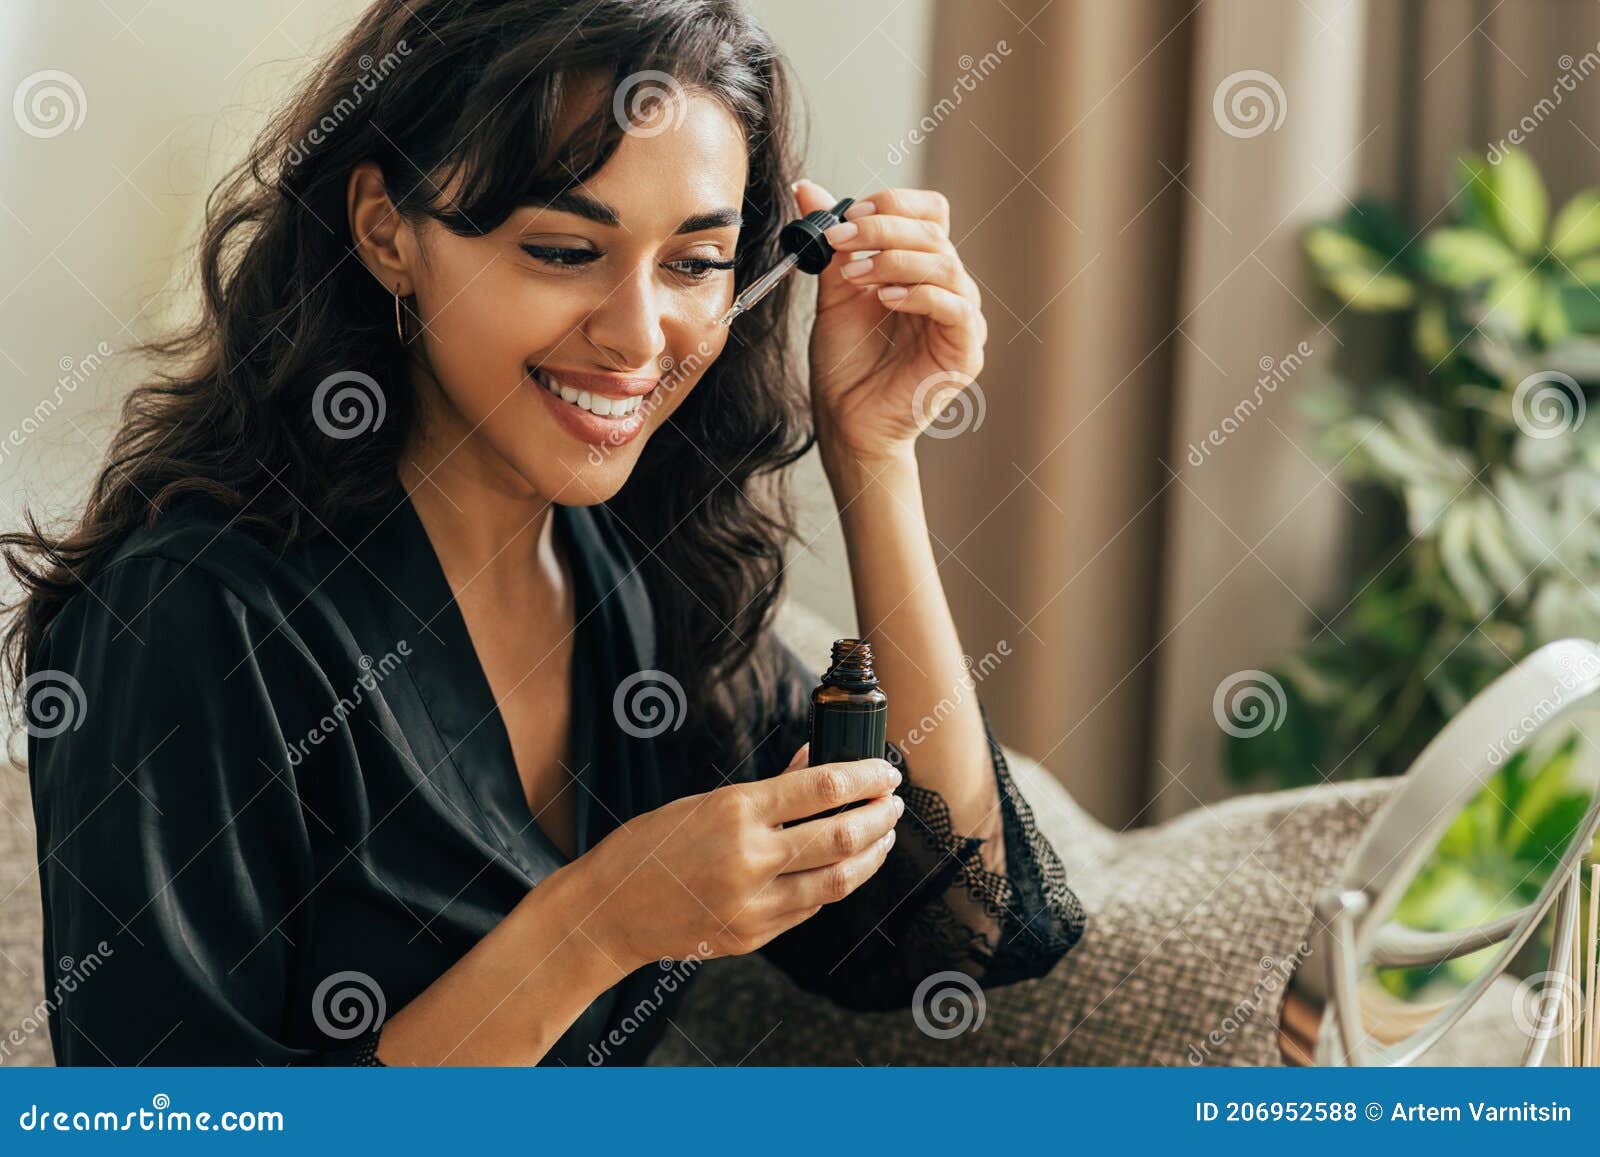 young smiling woman sitting on a couch applying hyaluronic acid on a face